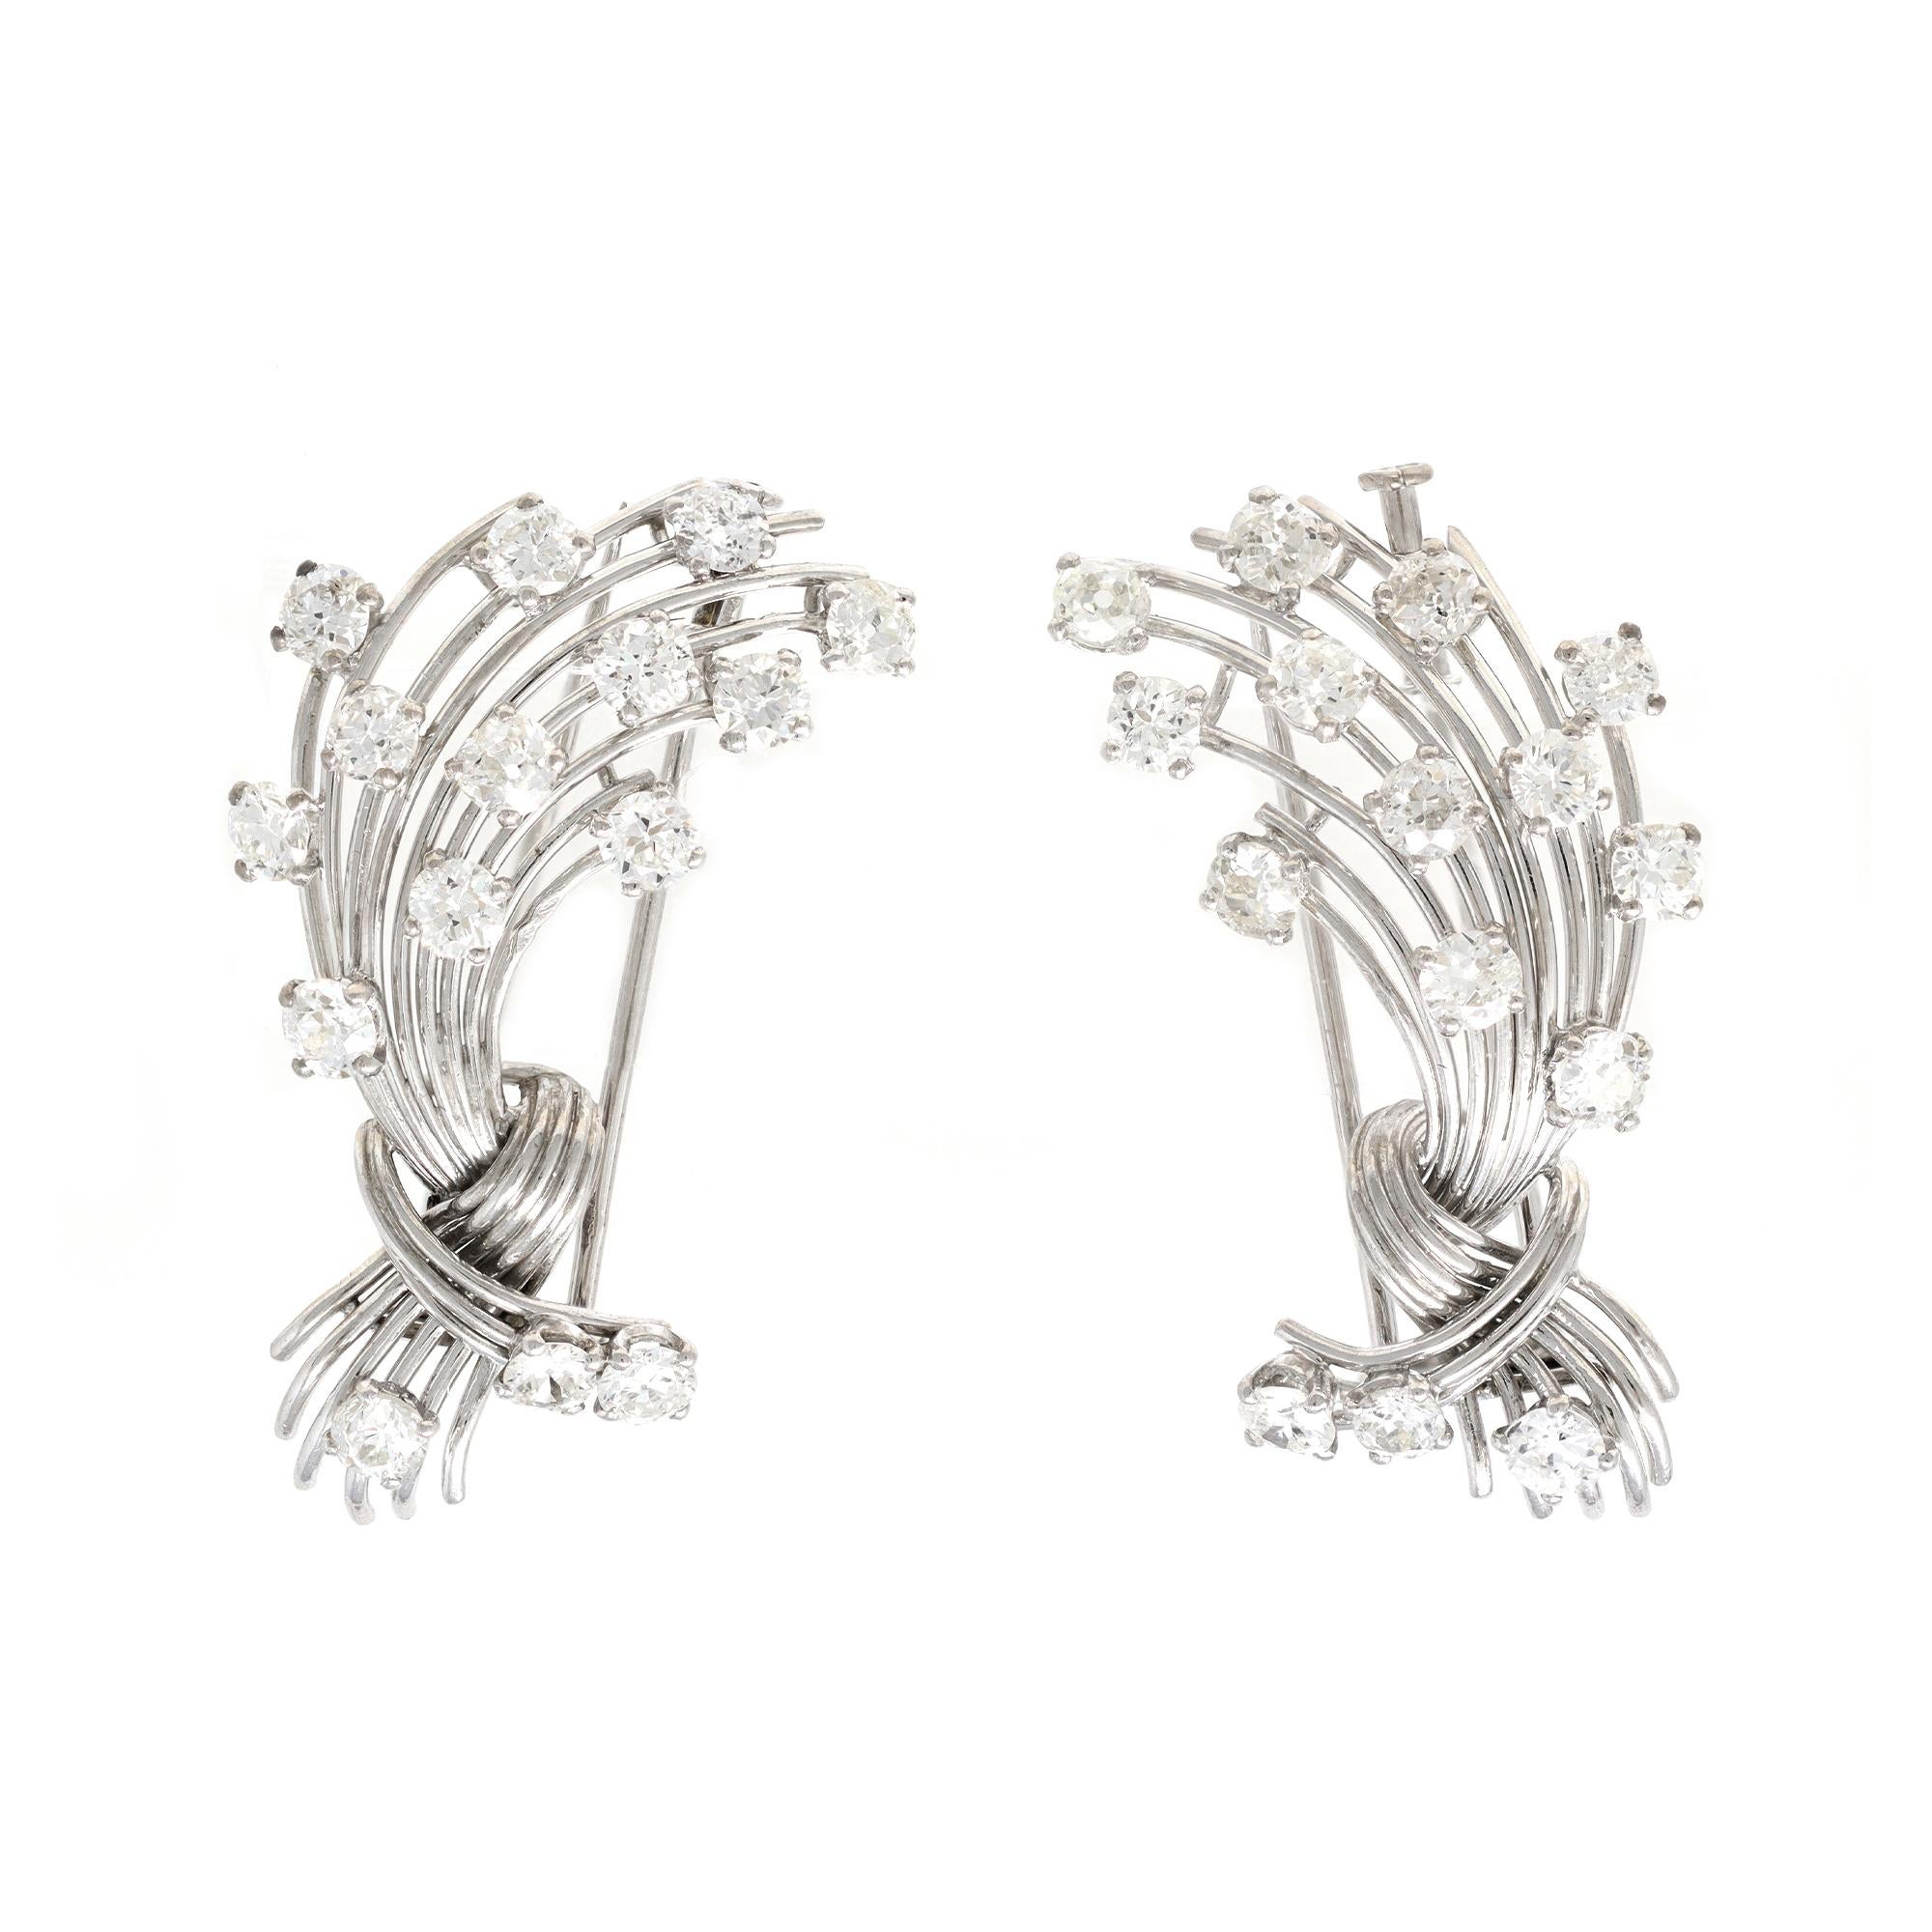 A vintage pair of clips signed by the iconic French house of MAUBOUSSIN Paris. The open work clips circa 1950 are set in platinum with the pin attachments in 18 karat white gold. The estimated weight of the diamonds is 7.50 carats of G color and